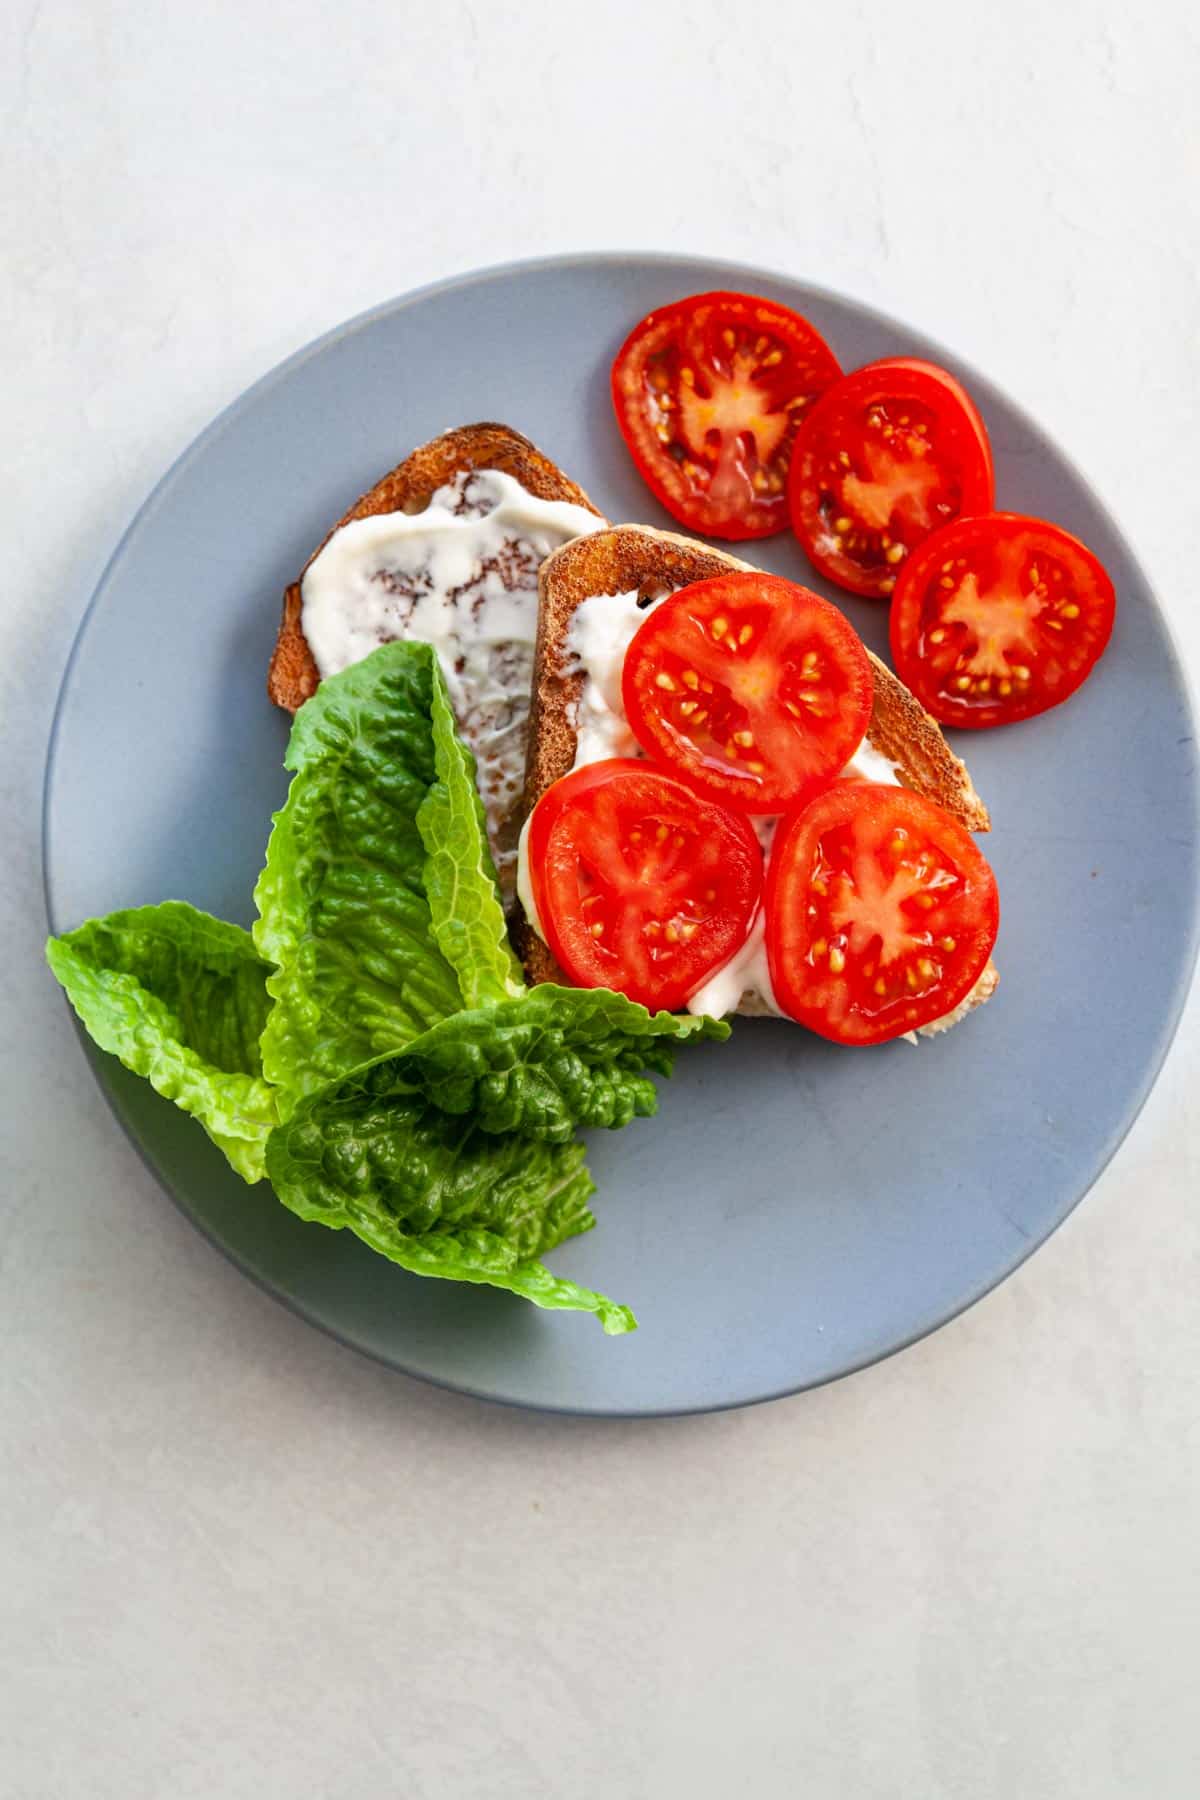 lettuce and tomato slices on bread with mayonnaise